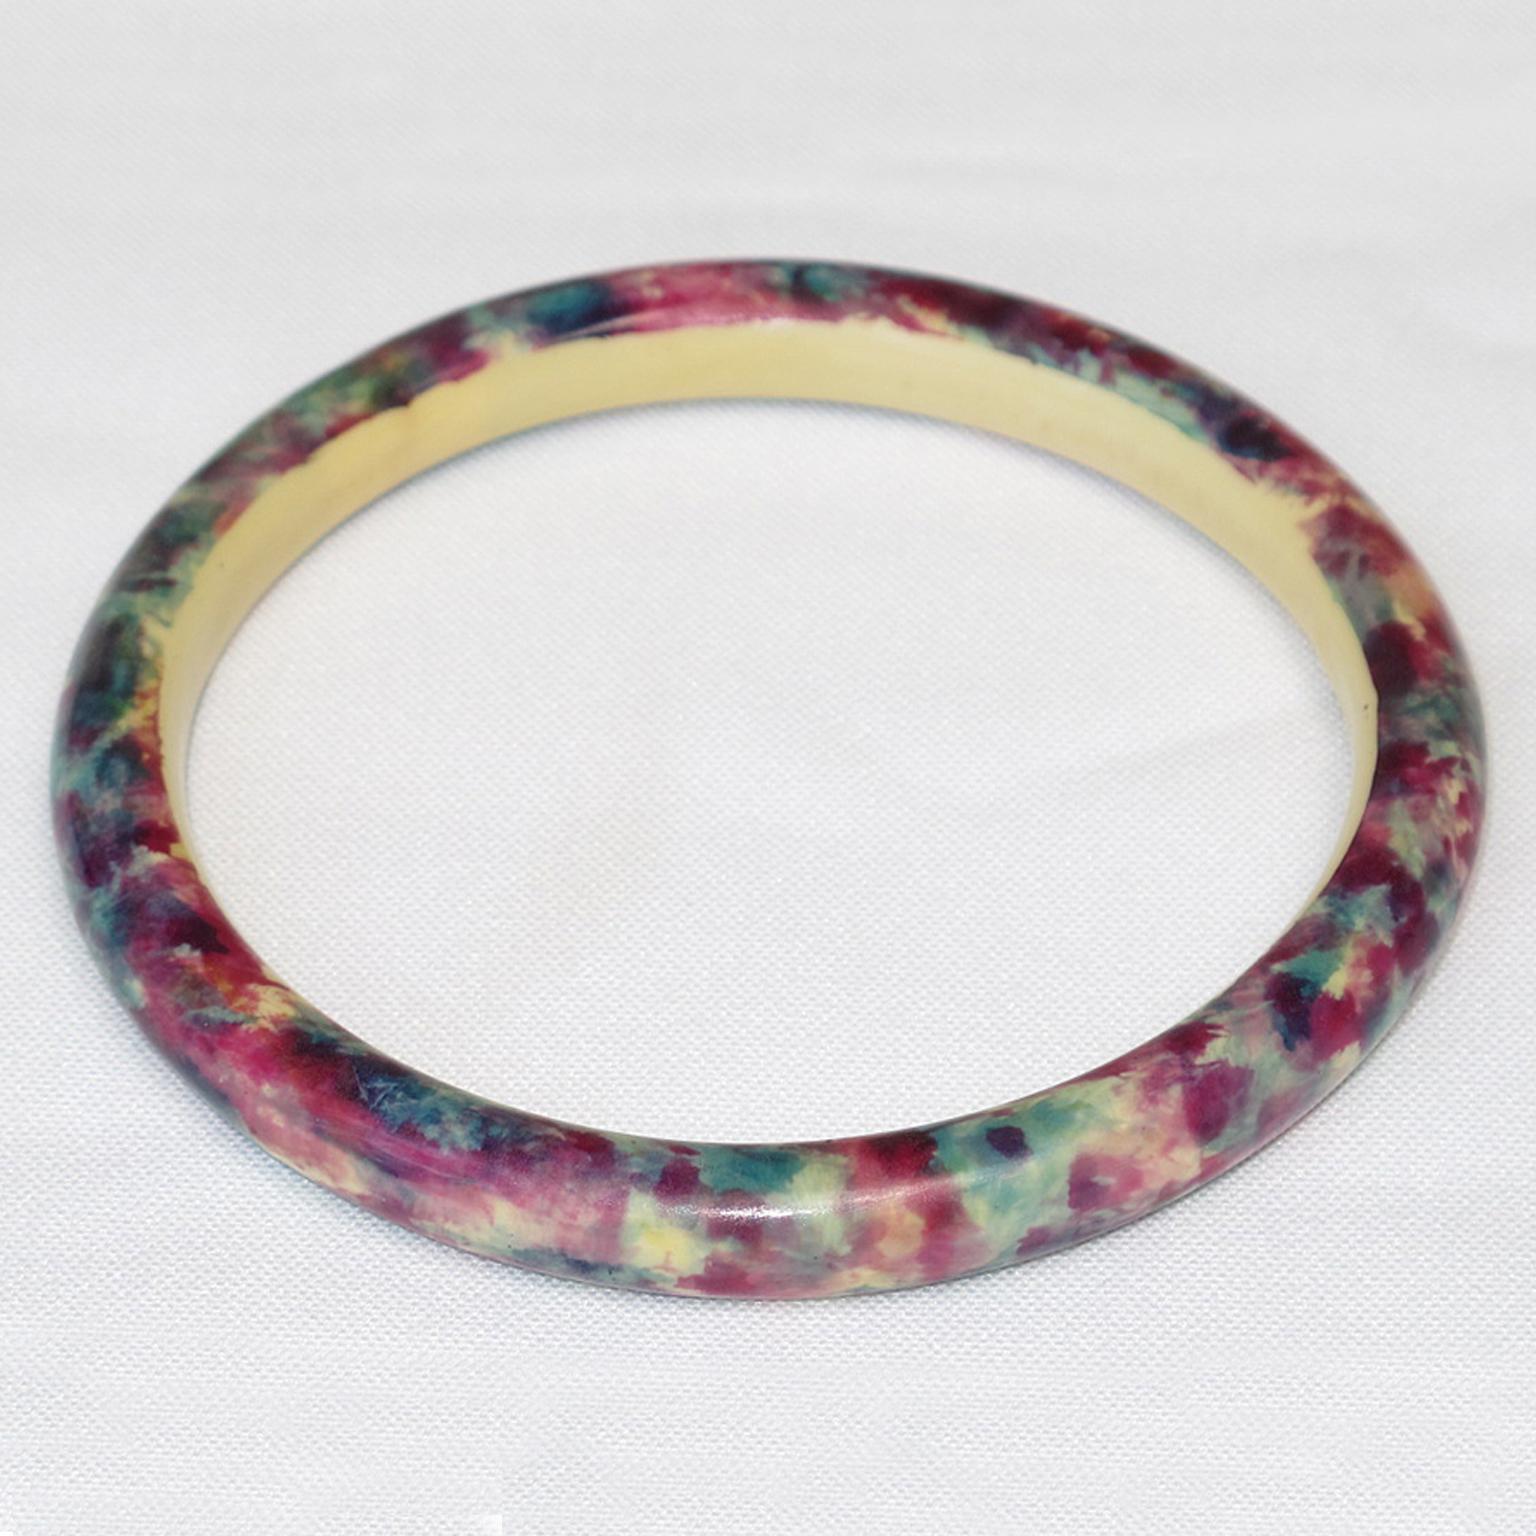 A striking 1920s French Art Deco celluloid bracelet bangle. It features a light hollow tube shape with a sponge paint application design all around the bracelet. 
The hollow bracelet technique is an ancient technique applied to jewelry at the turn